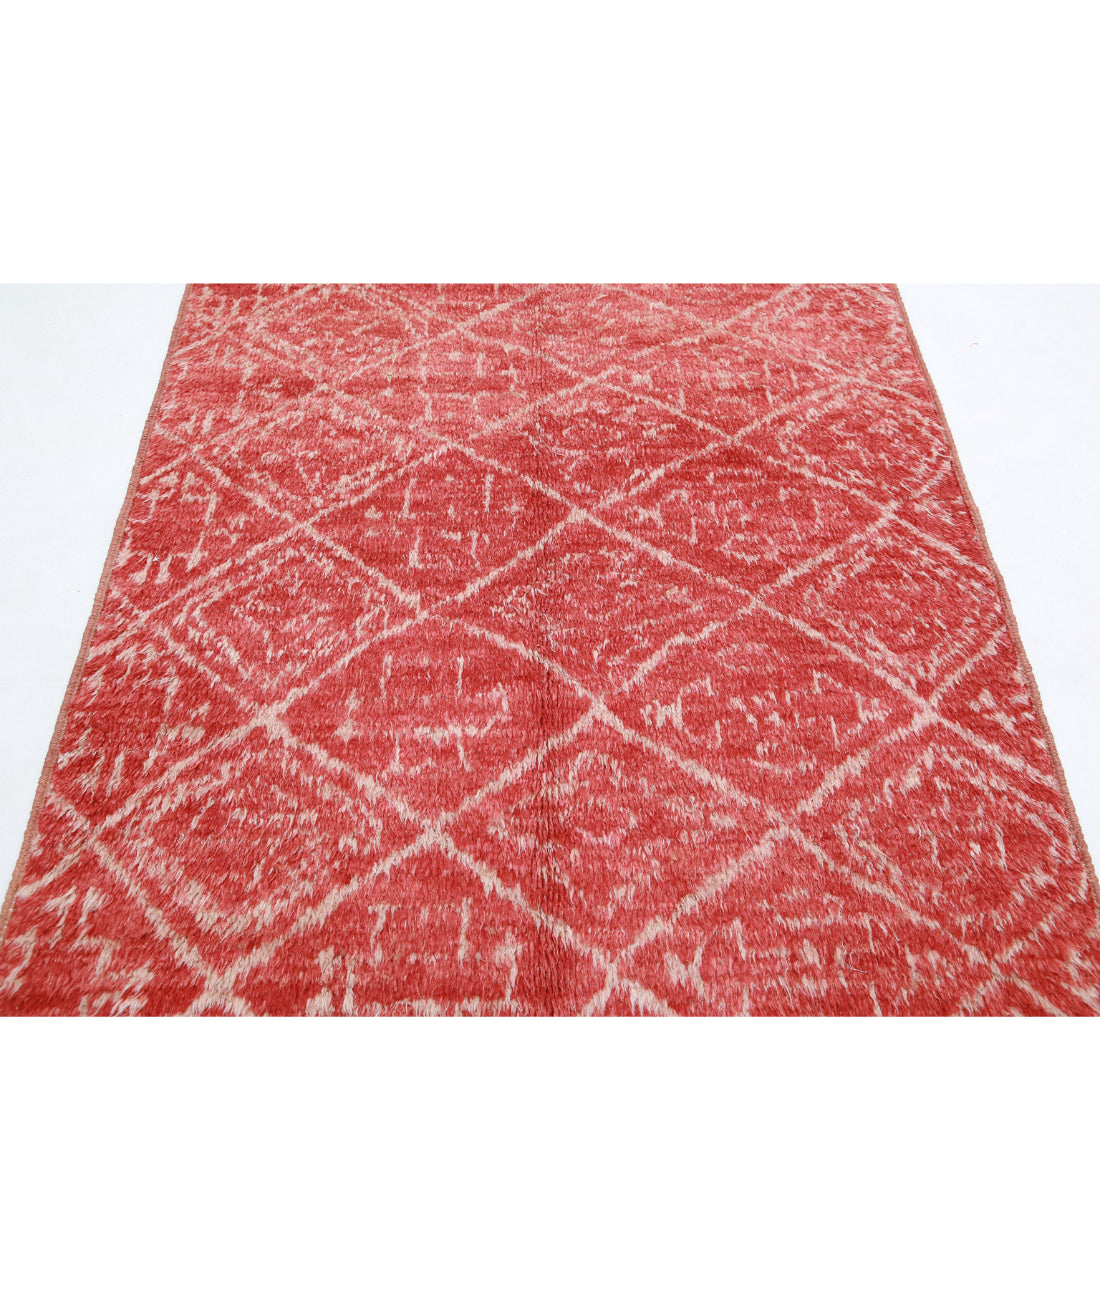 Hand Knotted Tribal Moroccan Wool Rug - 4'4'' x 5'9'' 4'4'' x 5'9'' (130 X 173) / Red / Ivory